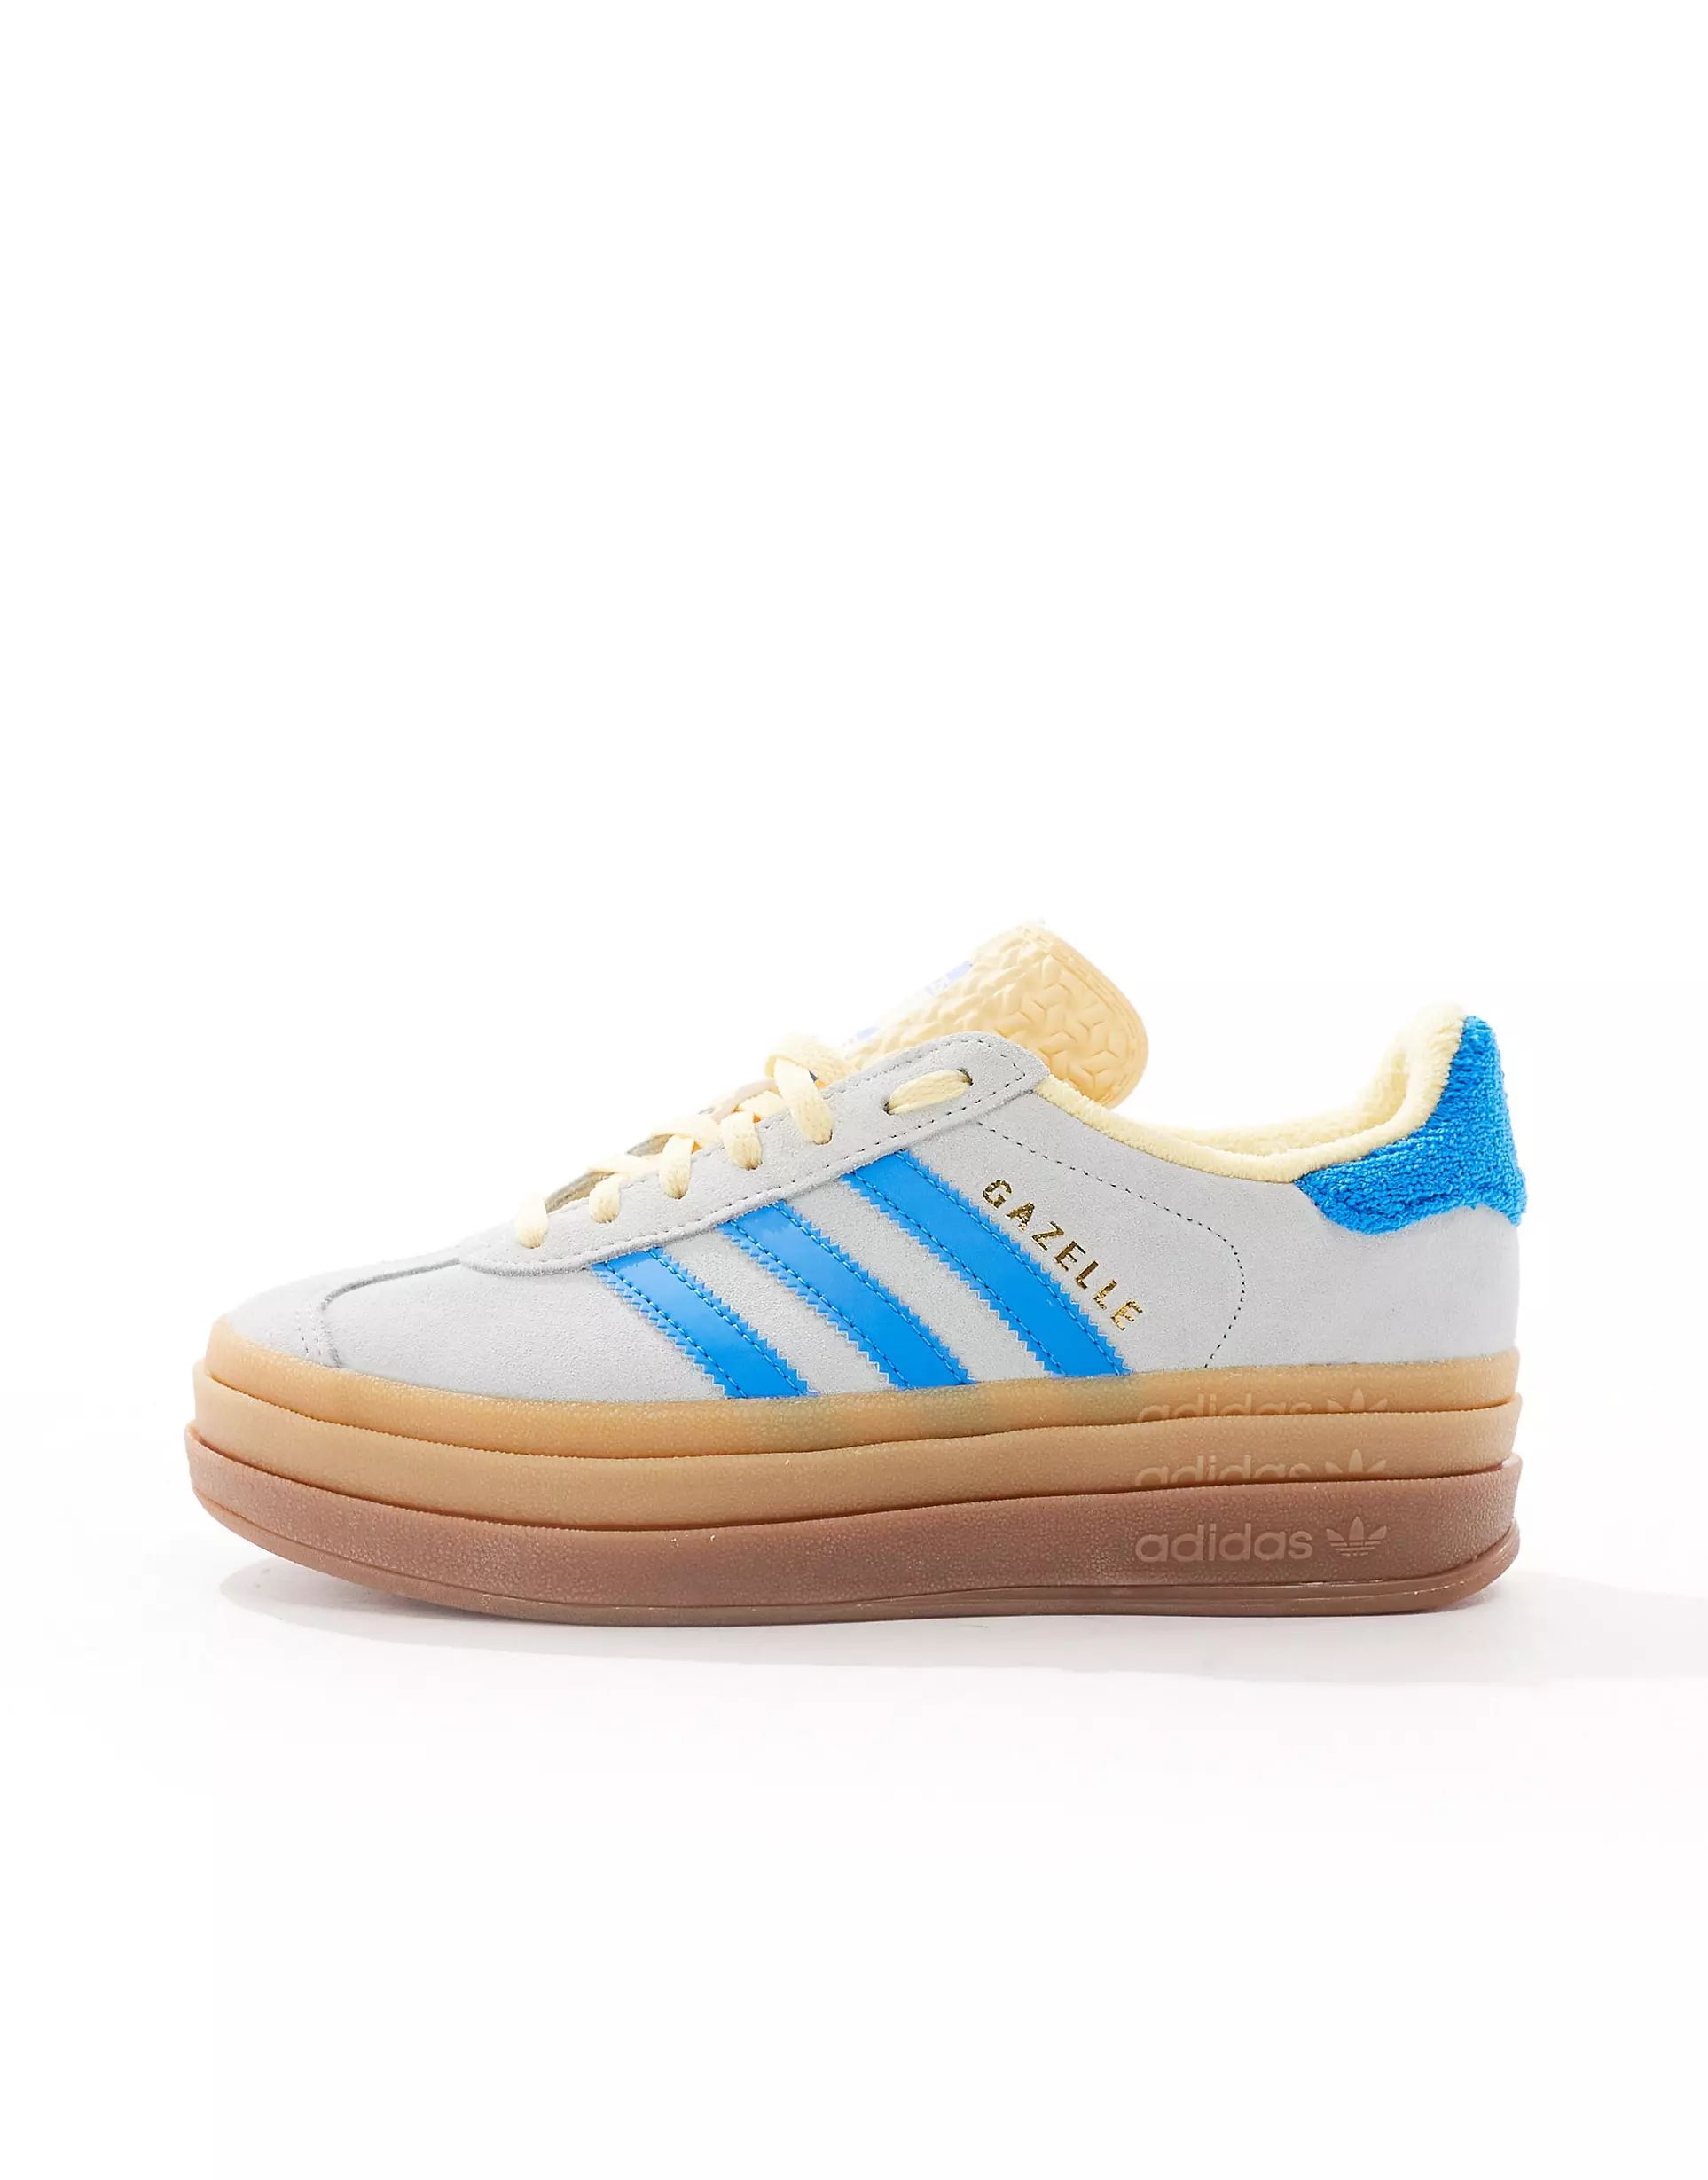 adidas Originals Gazelle Bold sneakers with rubber sole in blue and yellow | ASOS | ASOS (Global)